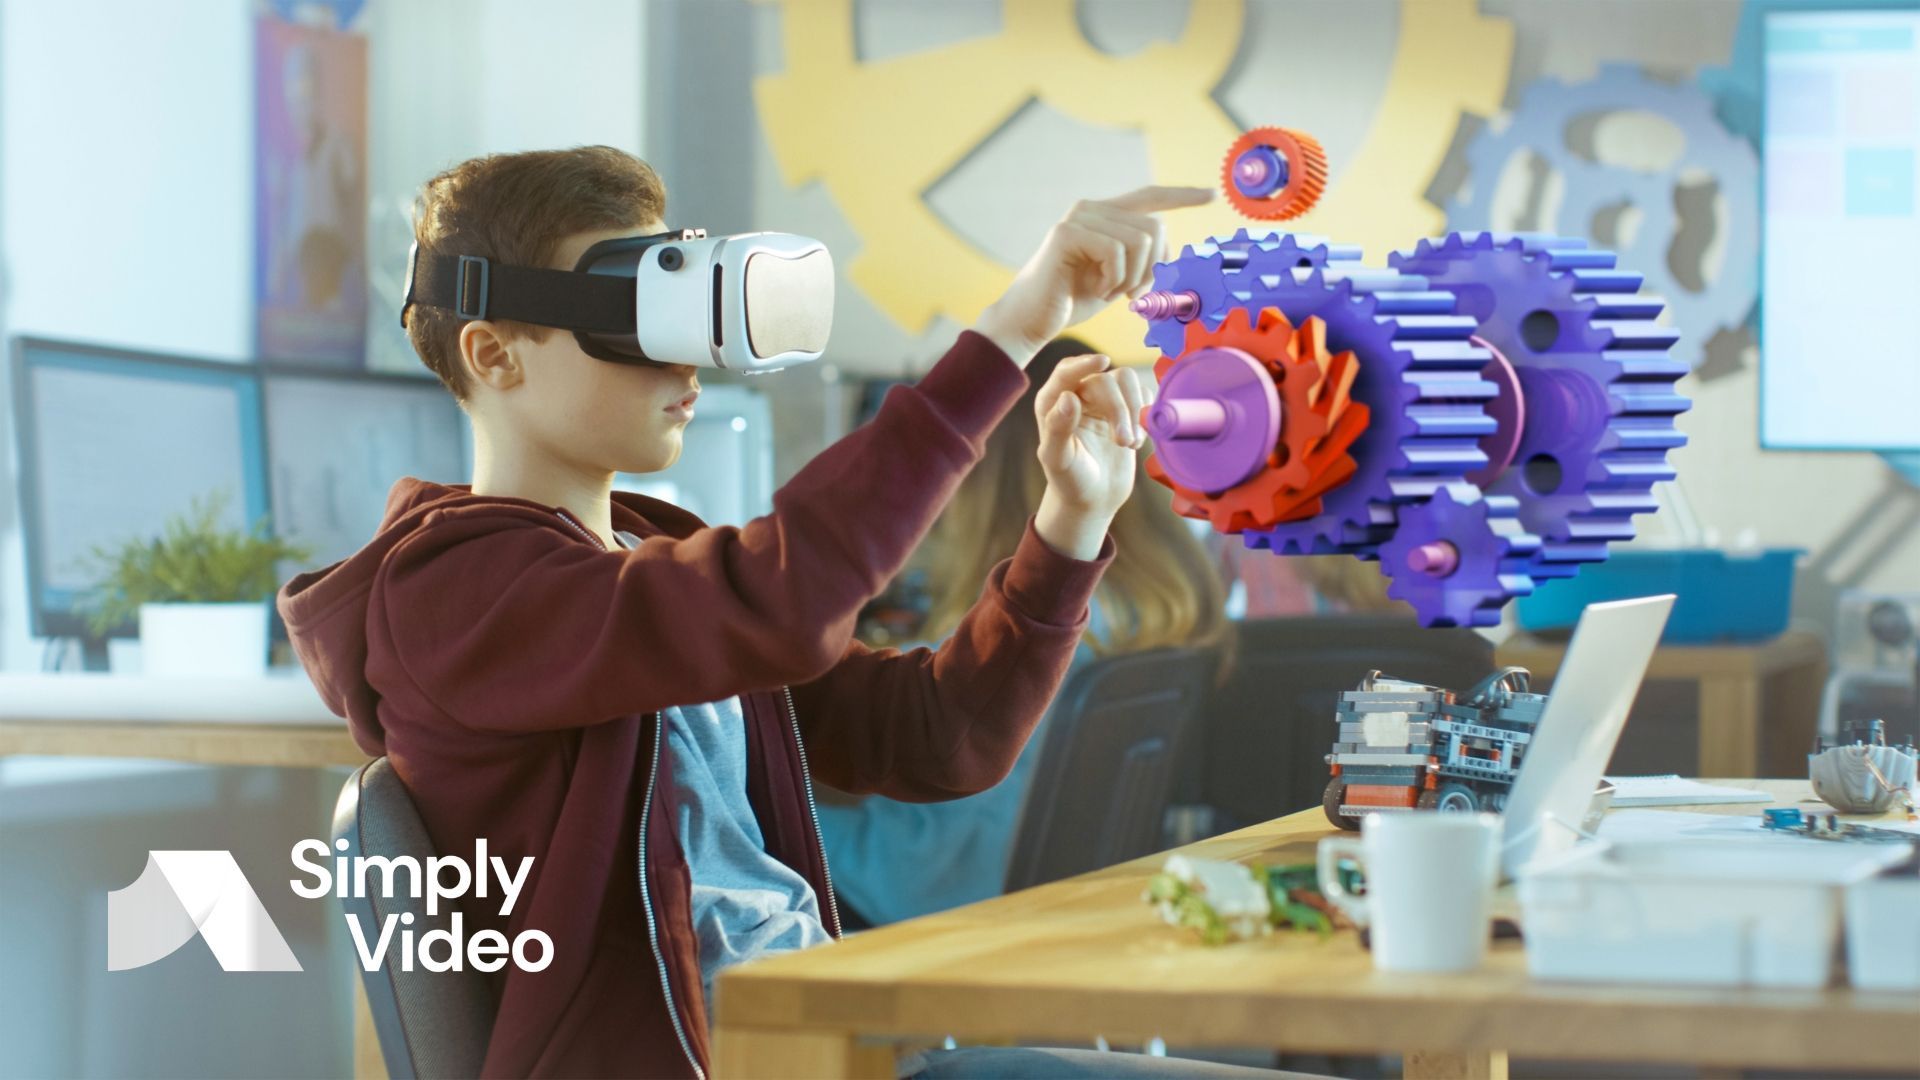 Could augmented reality (AR) be the next stage in the development of interactive learning? Here at SimplyVideo, we believe so. Learn more in our article.